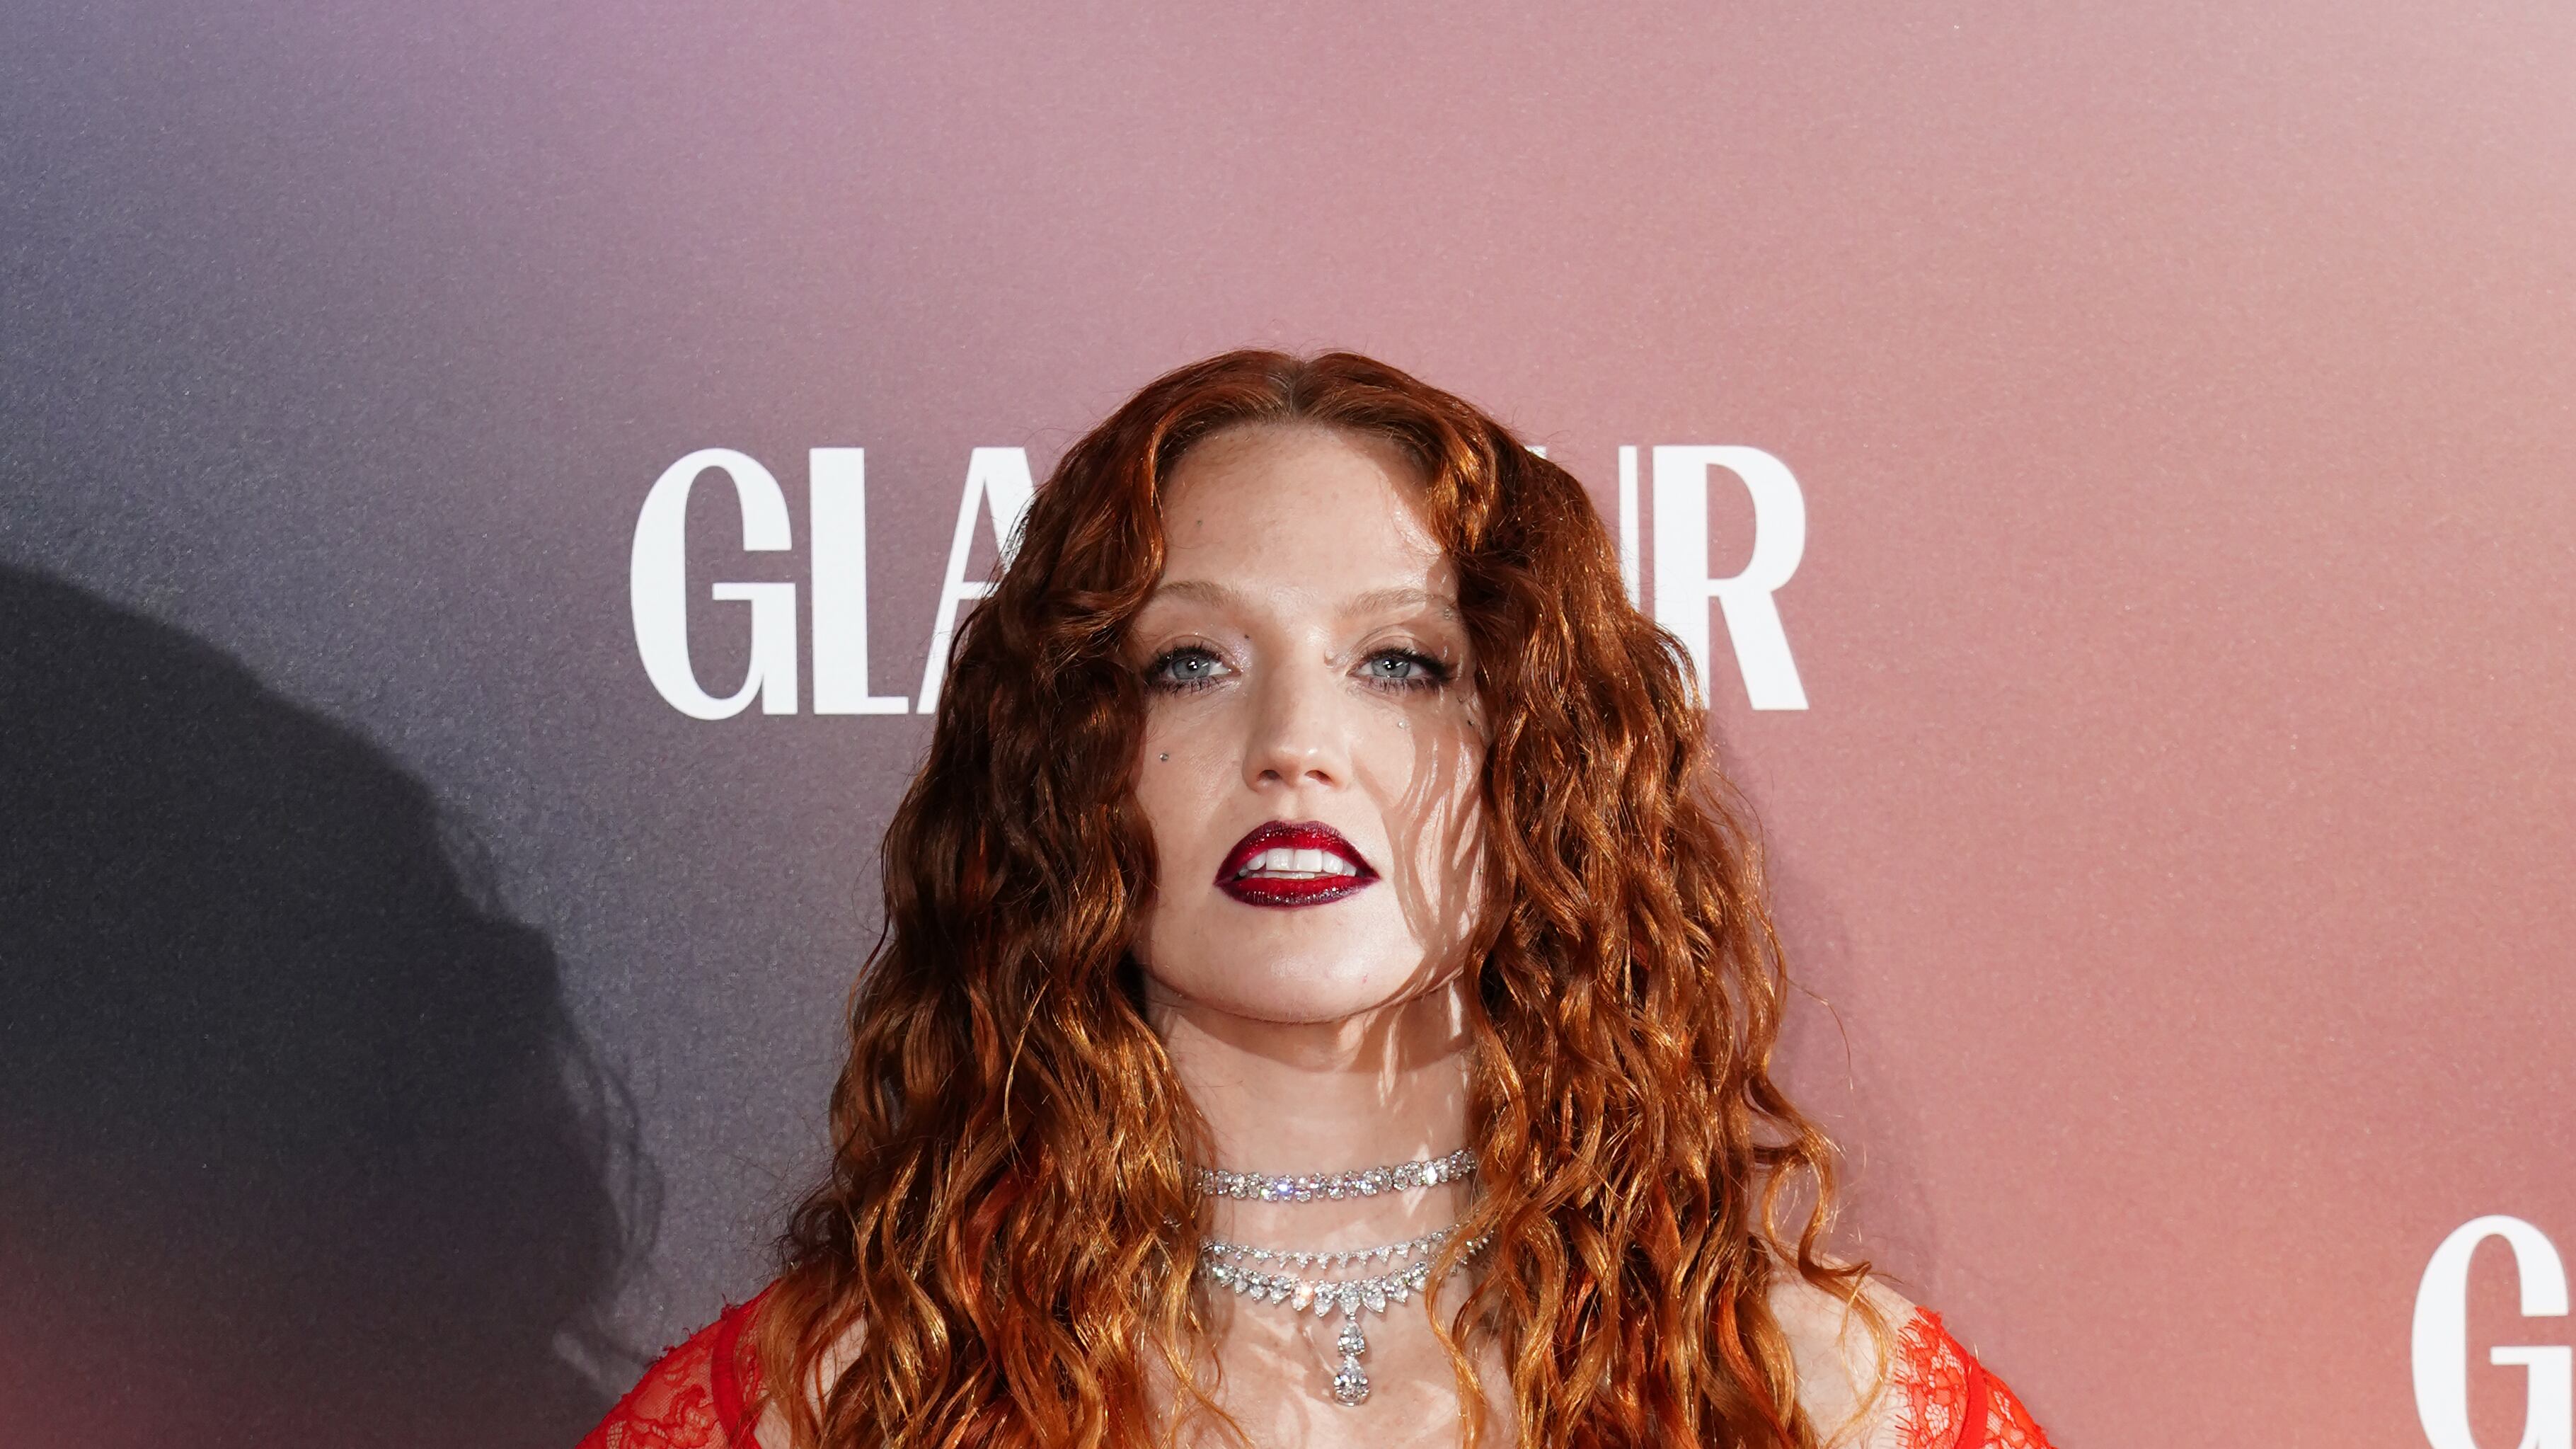 Jess Glynne has been presented with an award celebrating one billion streams in the UK